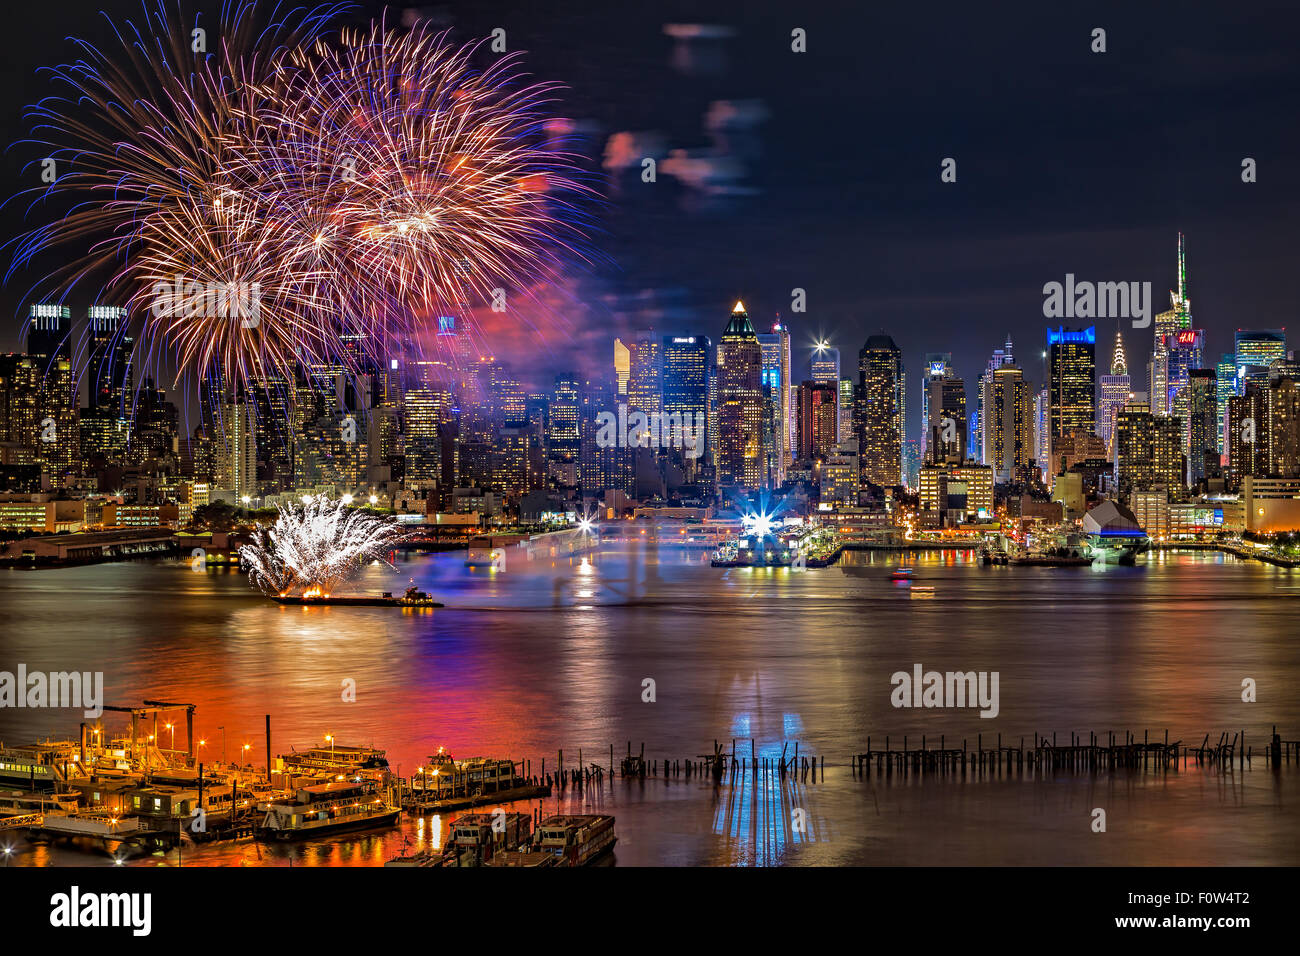 Fireworks on the Hudson River by midtown Manhattan with illuminated